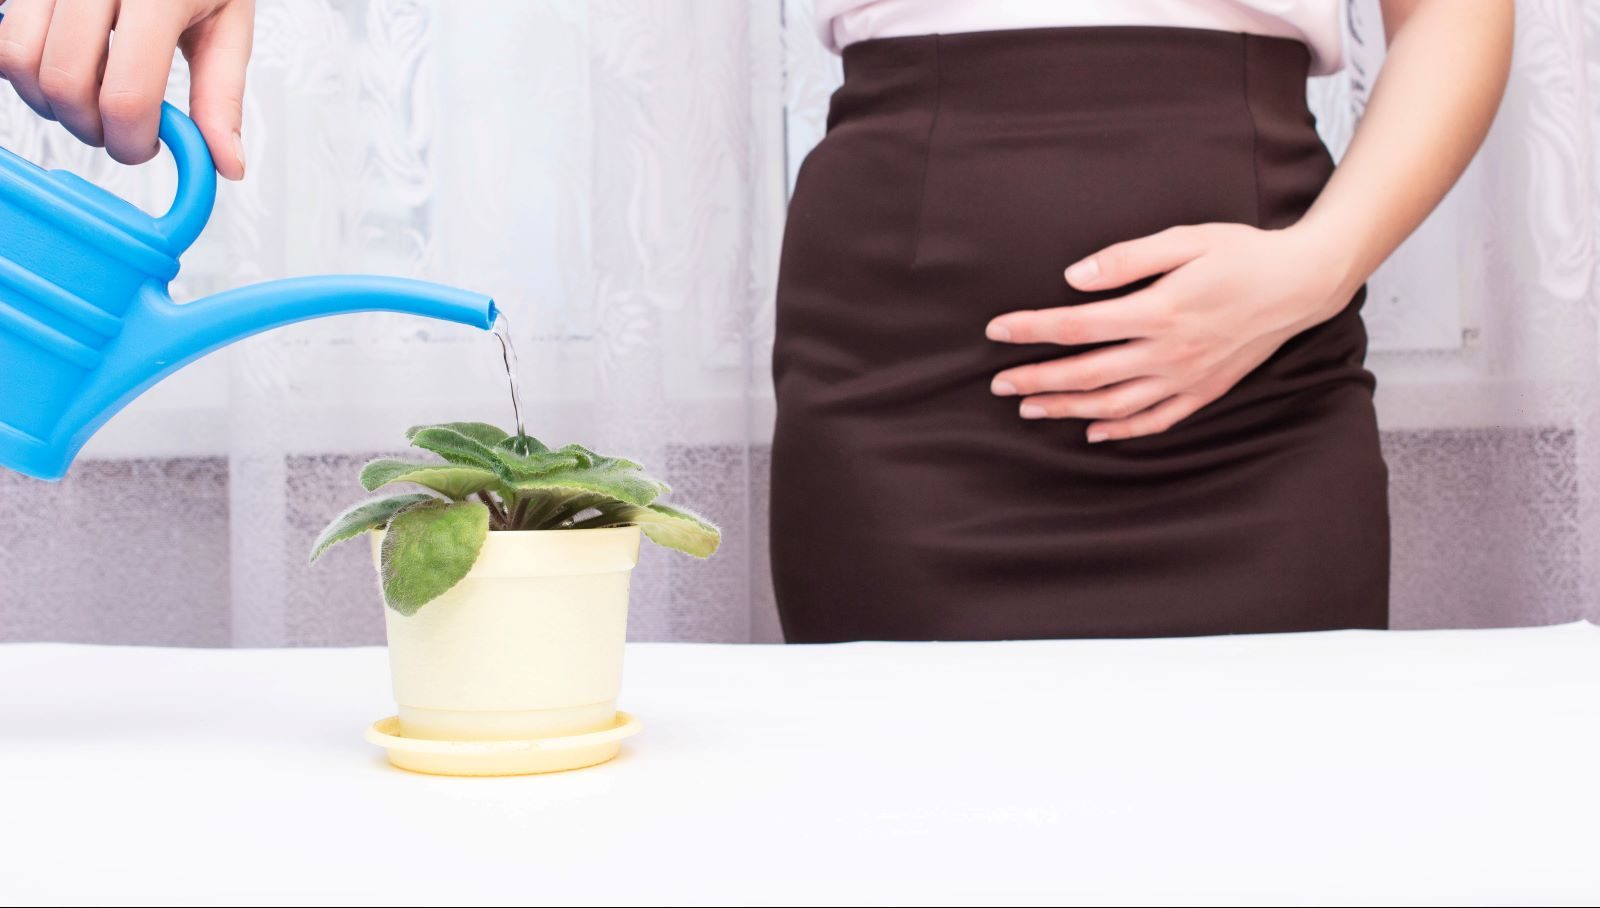 Urinary Incontinence in Women: A Flood of Treatment Options